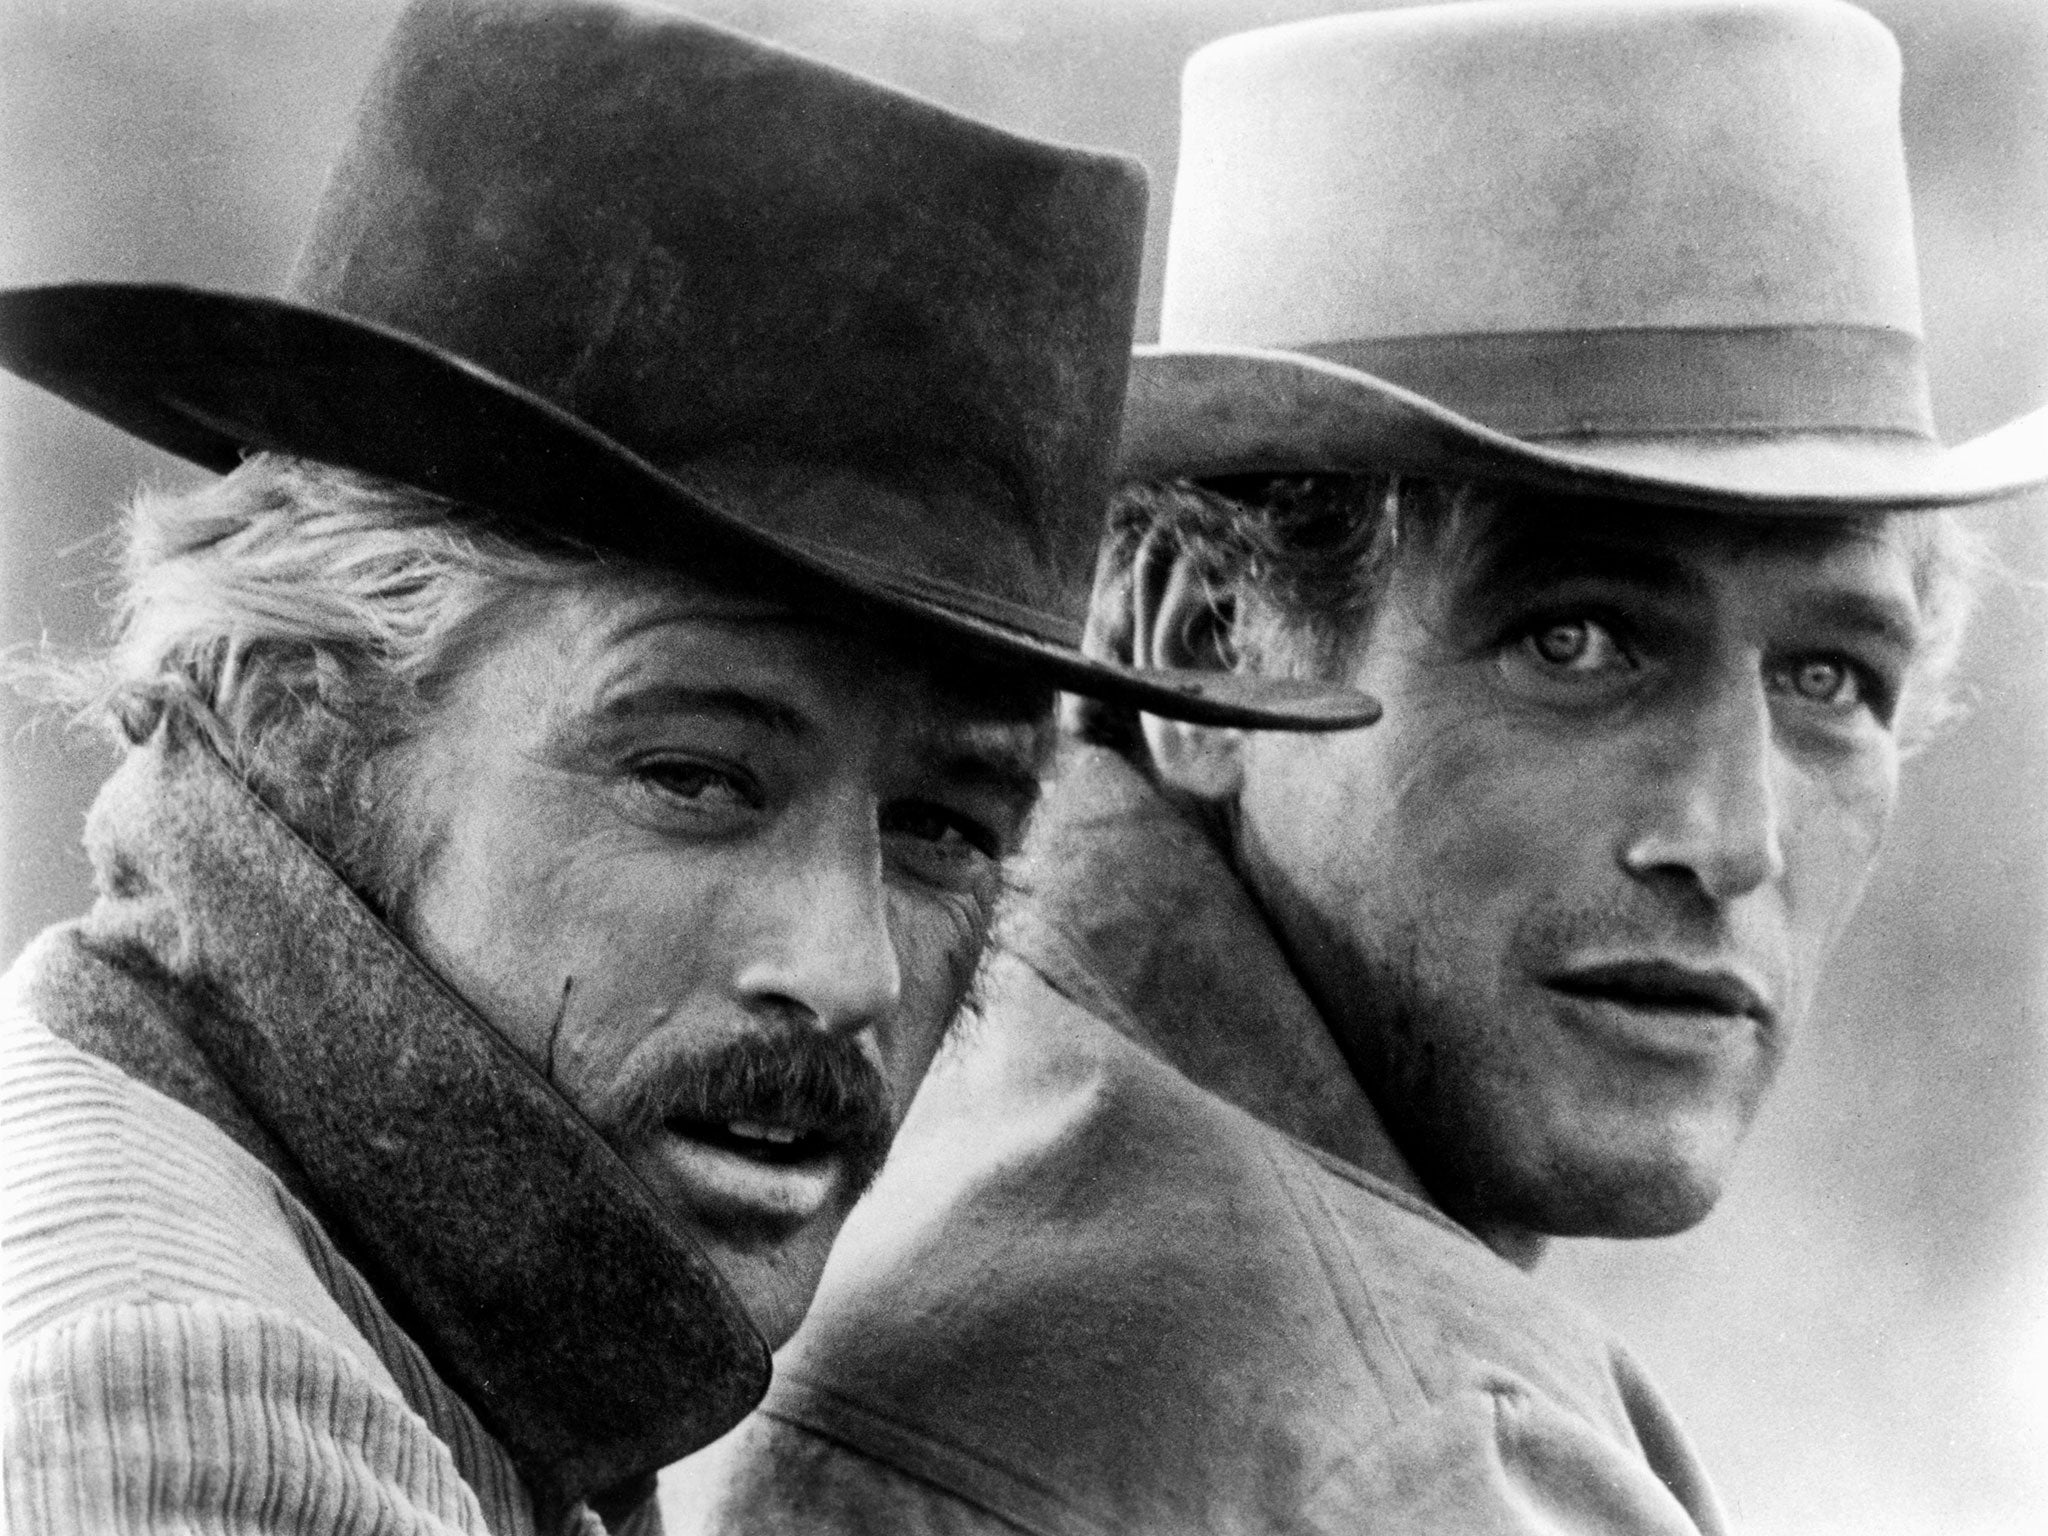 Robert Redford (left) and Paul Newman in ‘Butch Cassidy and the Sundance Kid’, the film that made Goldman’s name